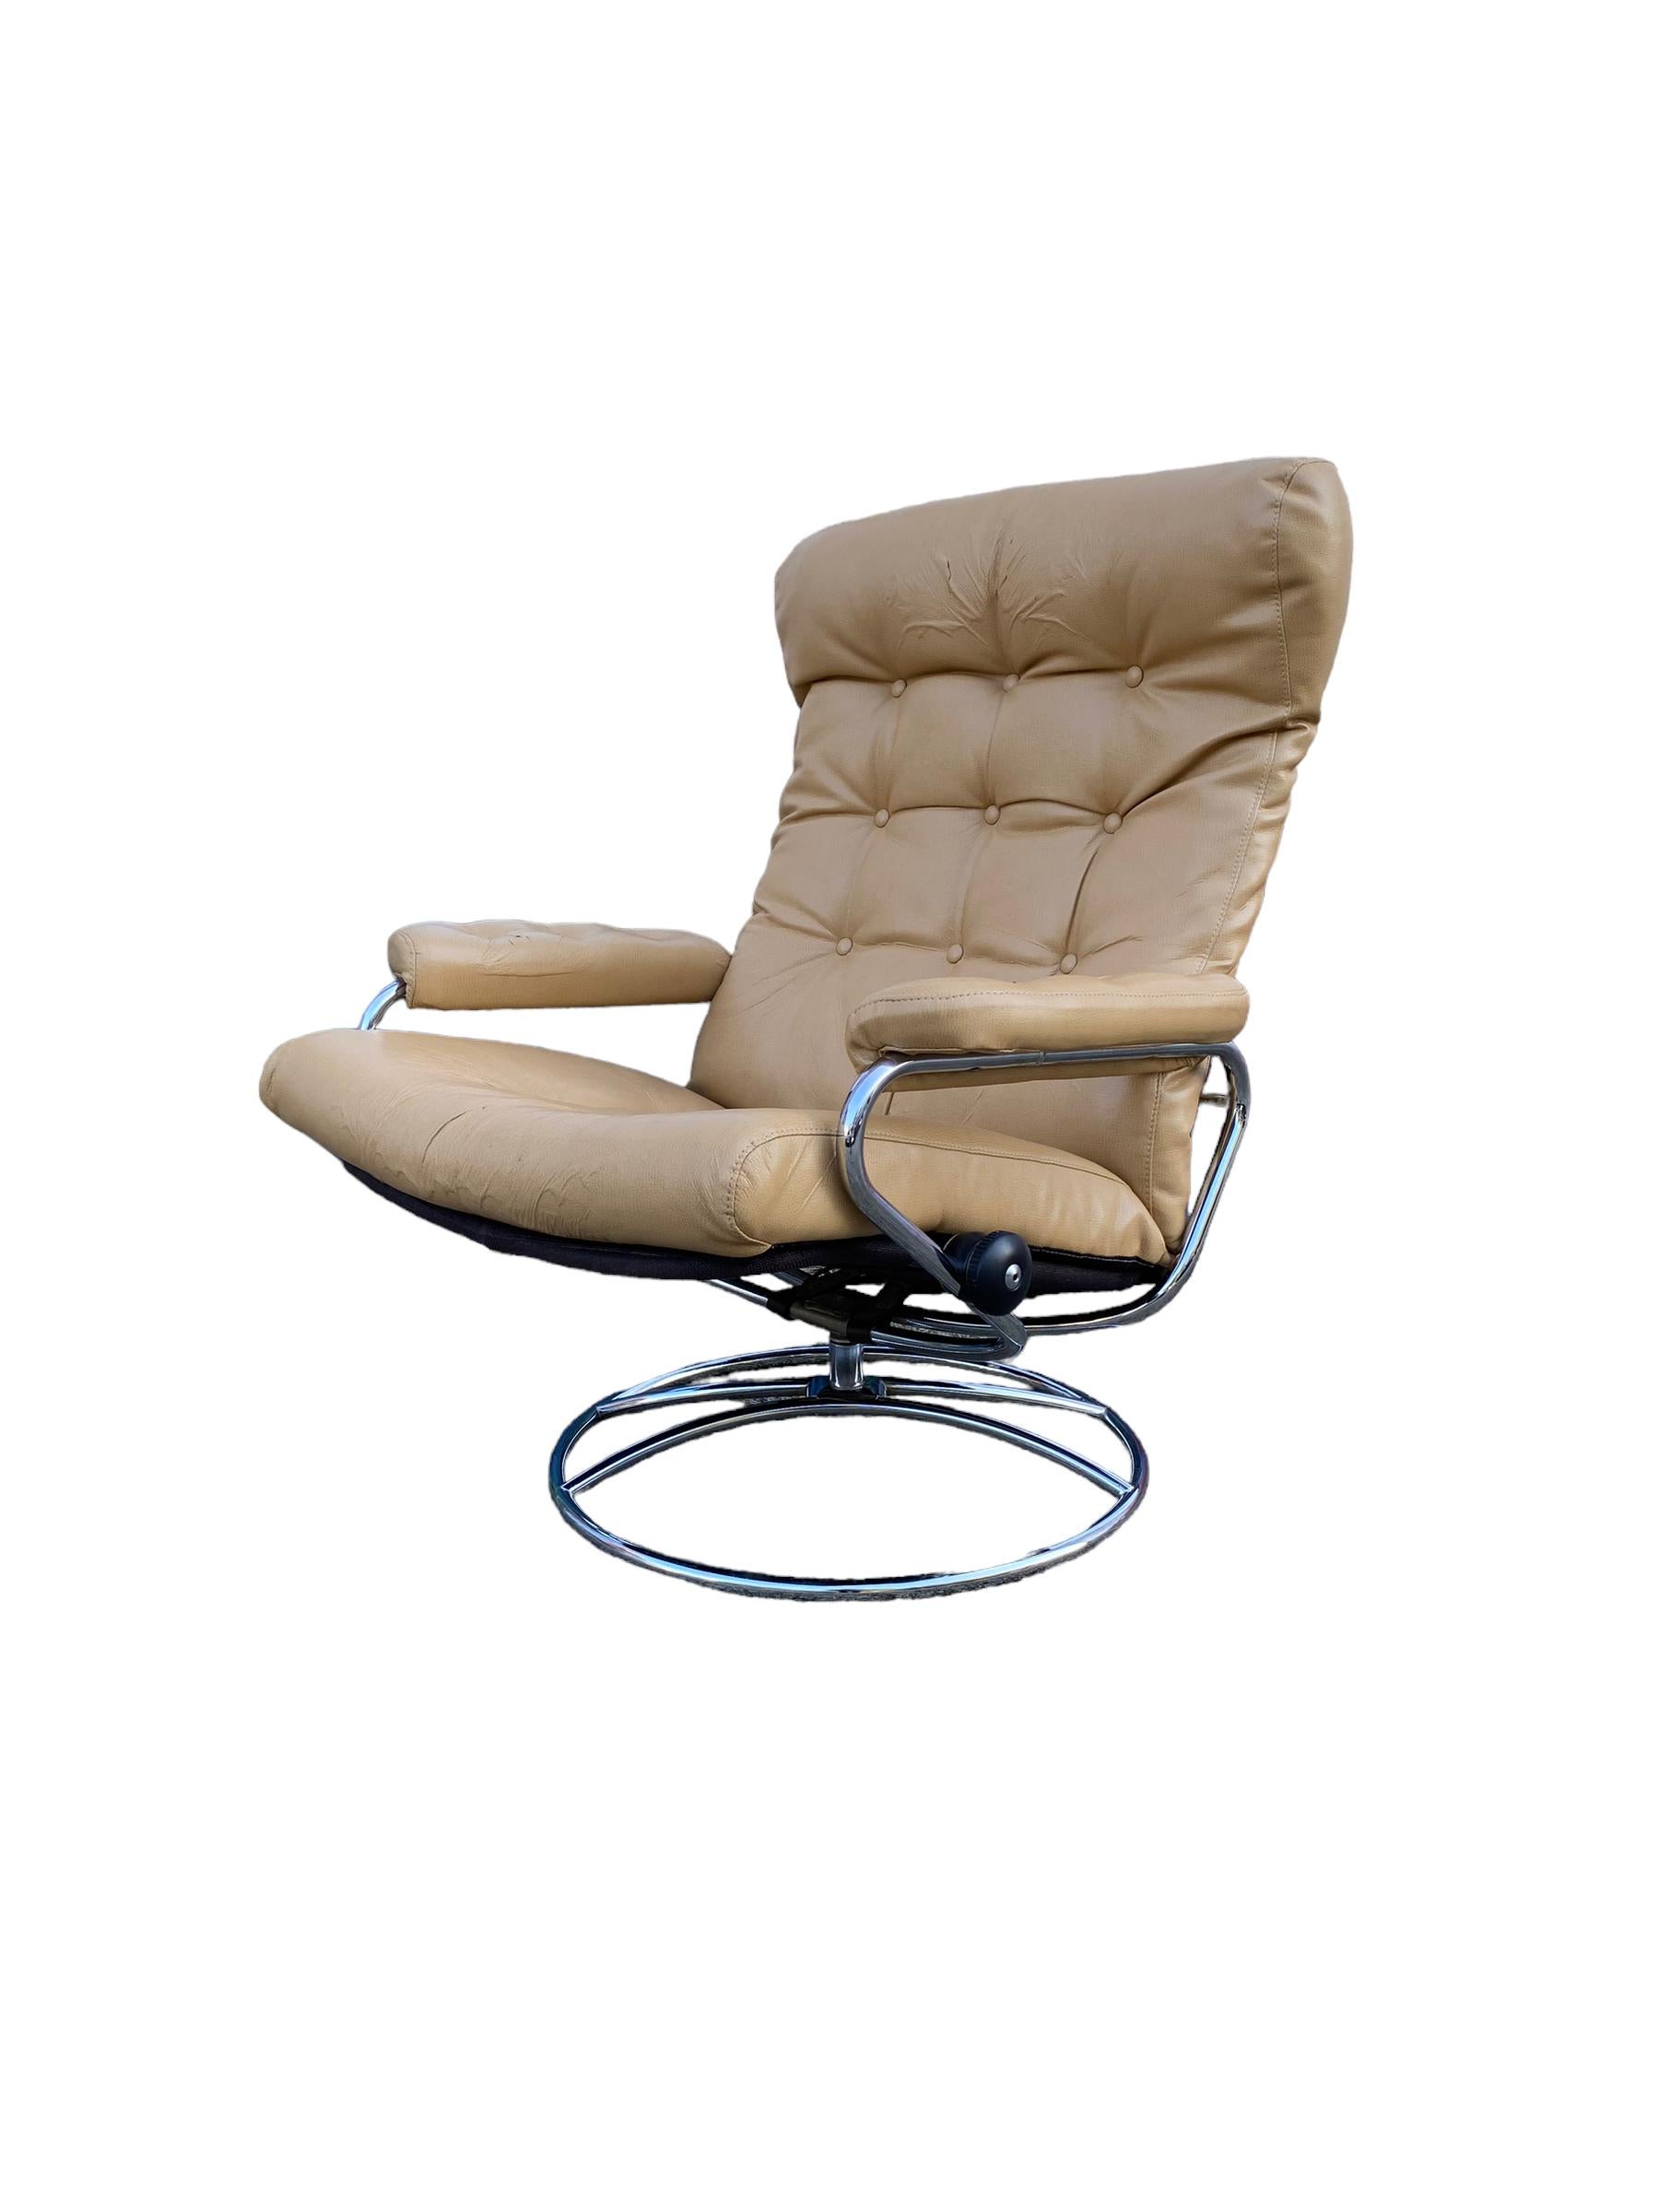 Ekornes Stressless Reclining Lounge Chair and Ottoman For Sale 2